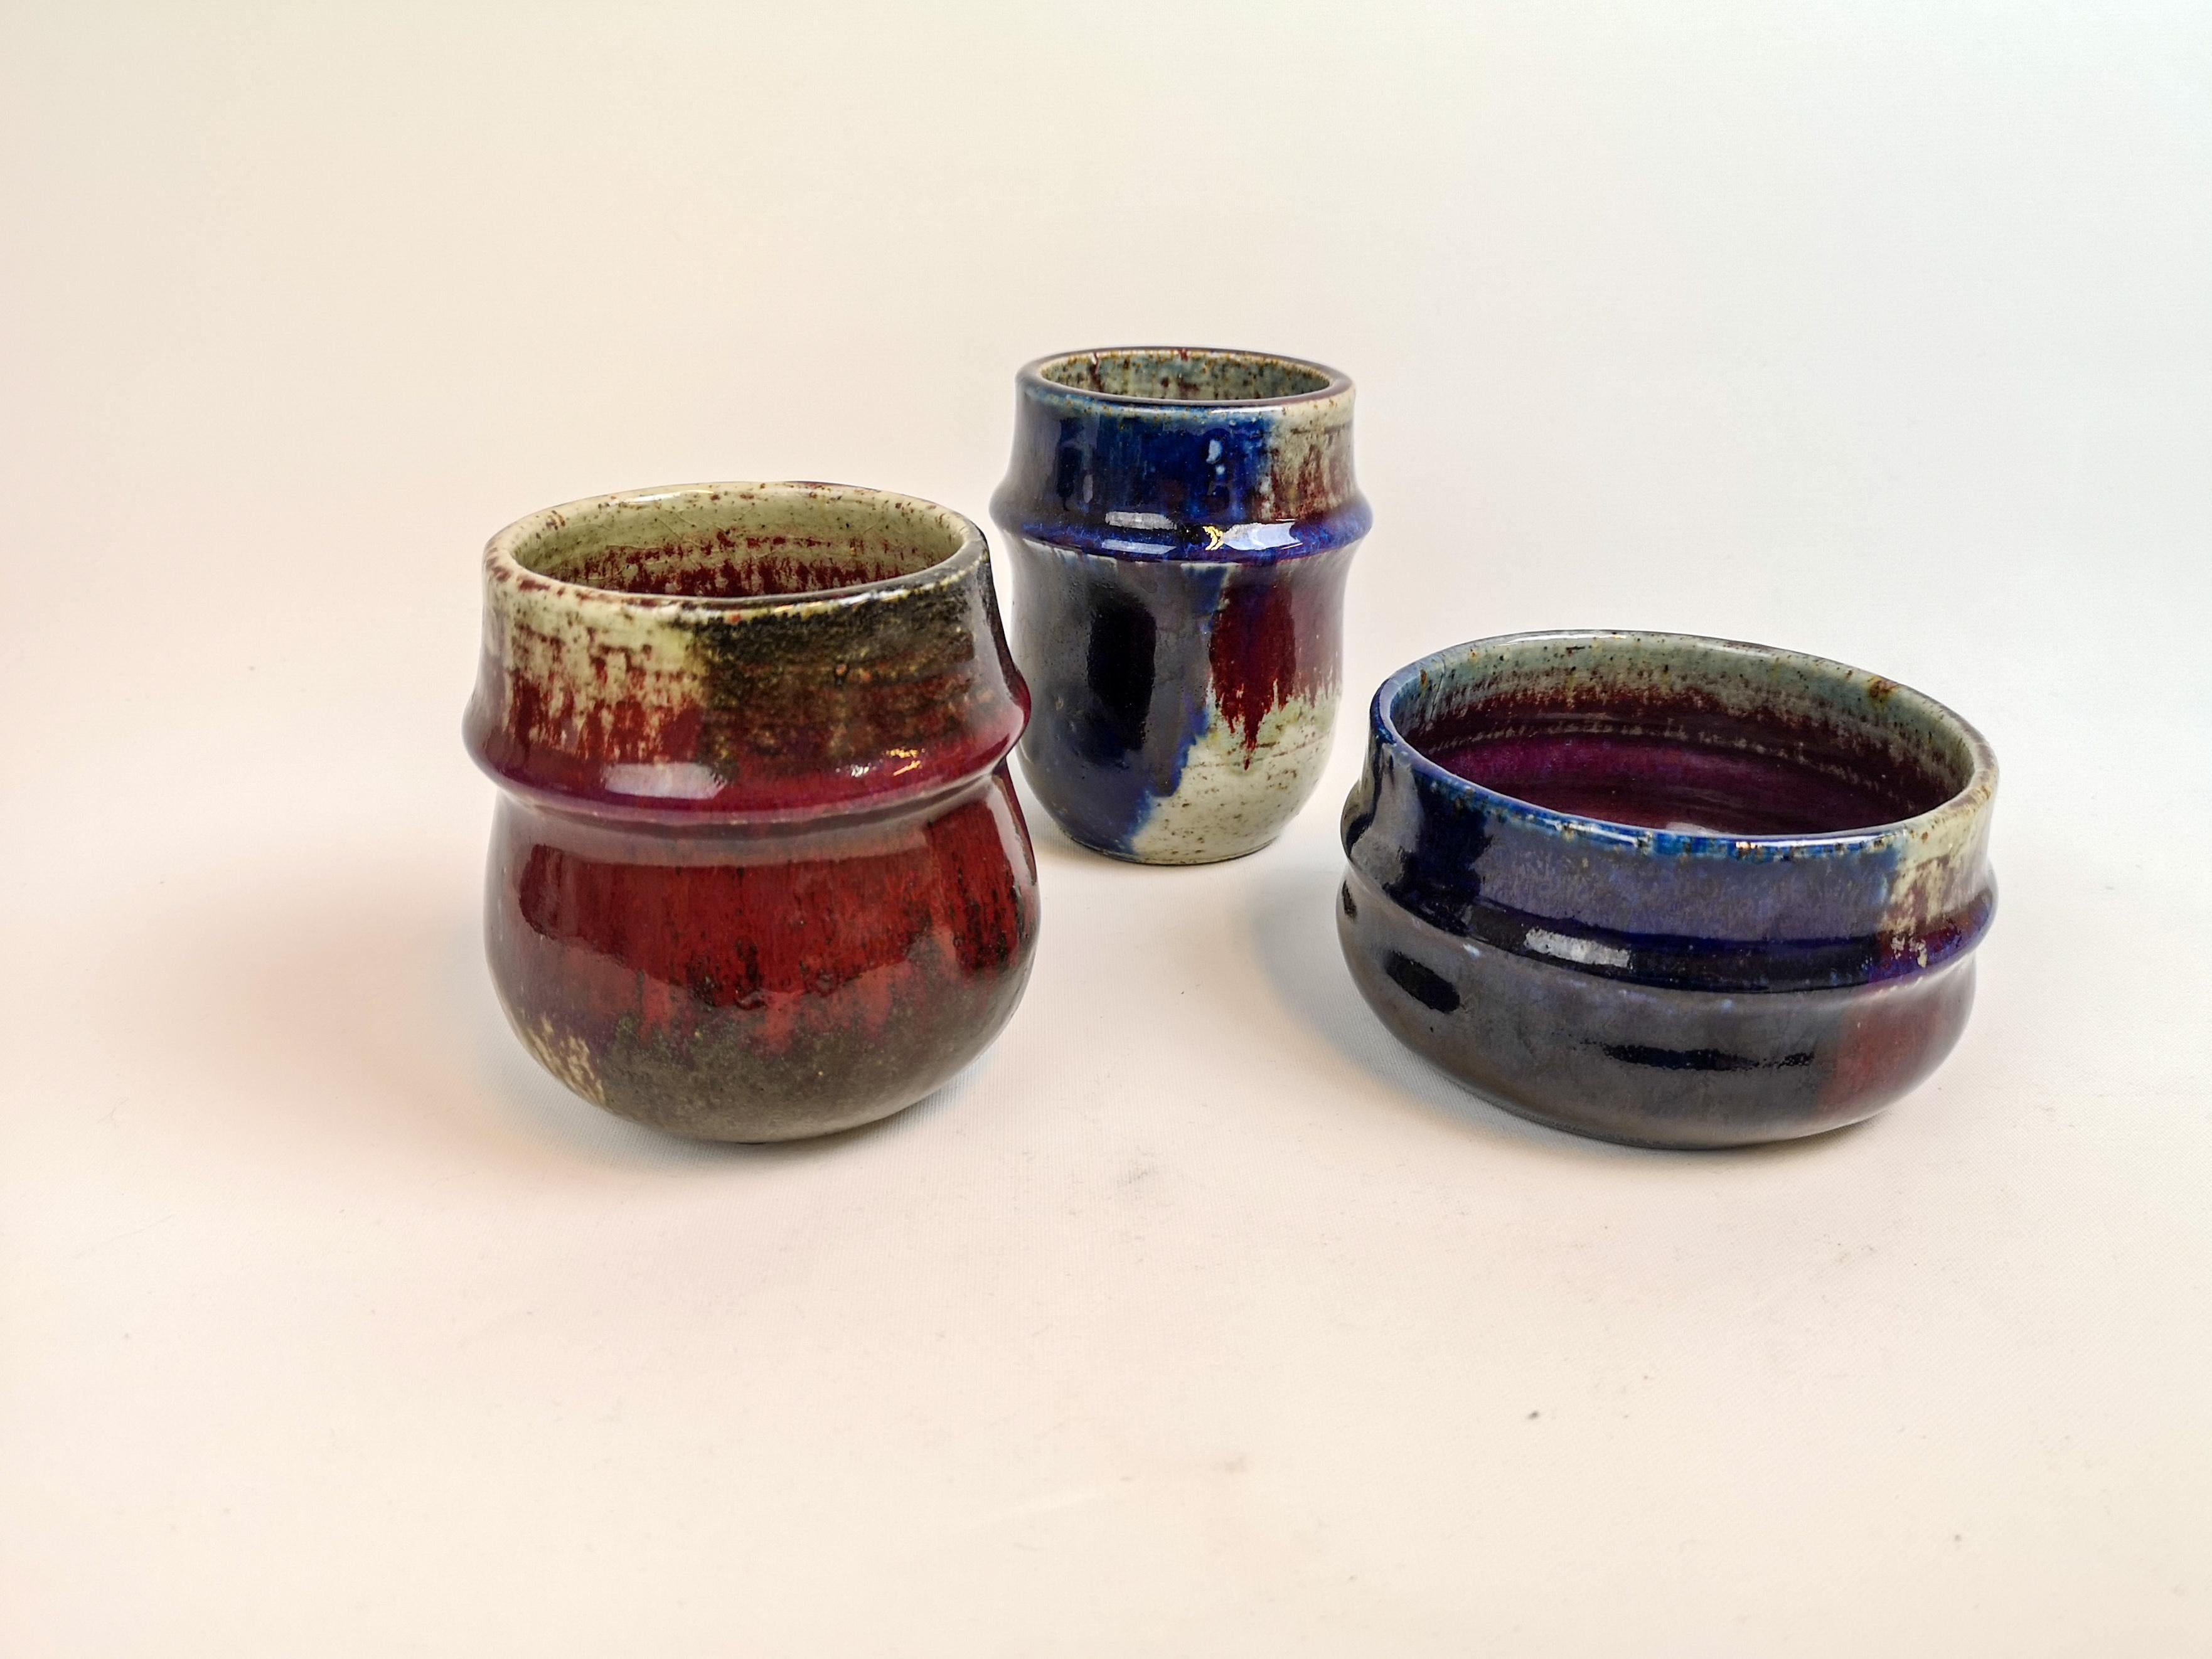 This set containing 3 pieces ceramic was designed by Sylvia Leuchovius and produced by Rörstrand. These three pieces are marked as studio ceramic and are well sculptured with a stunning glaze. They all shift in color as the glaze give them all that